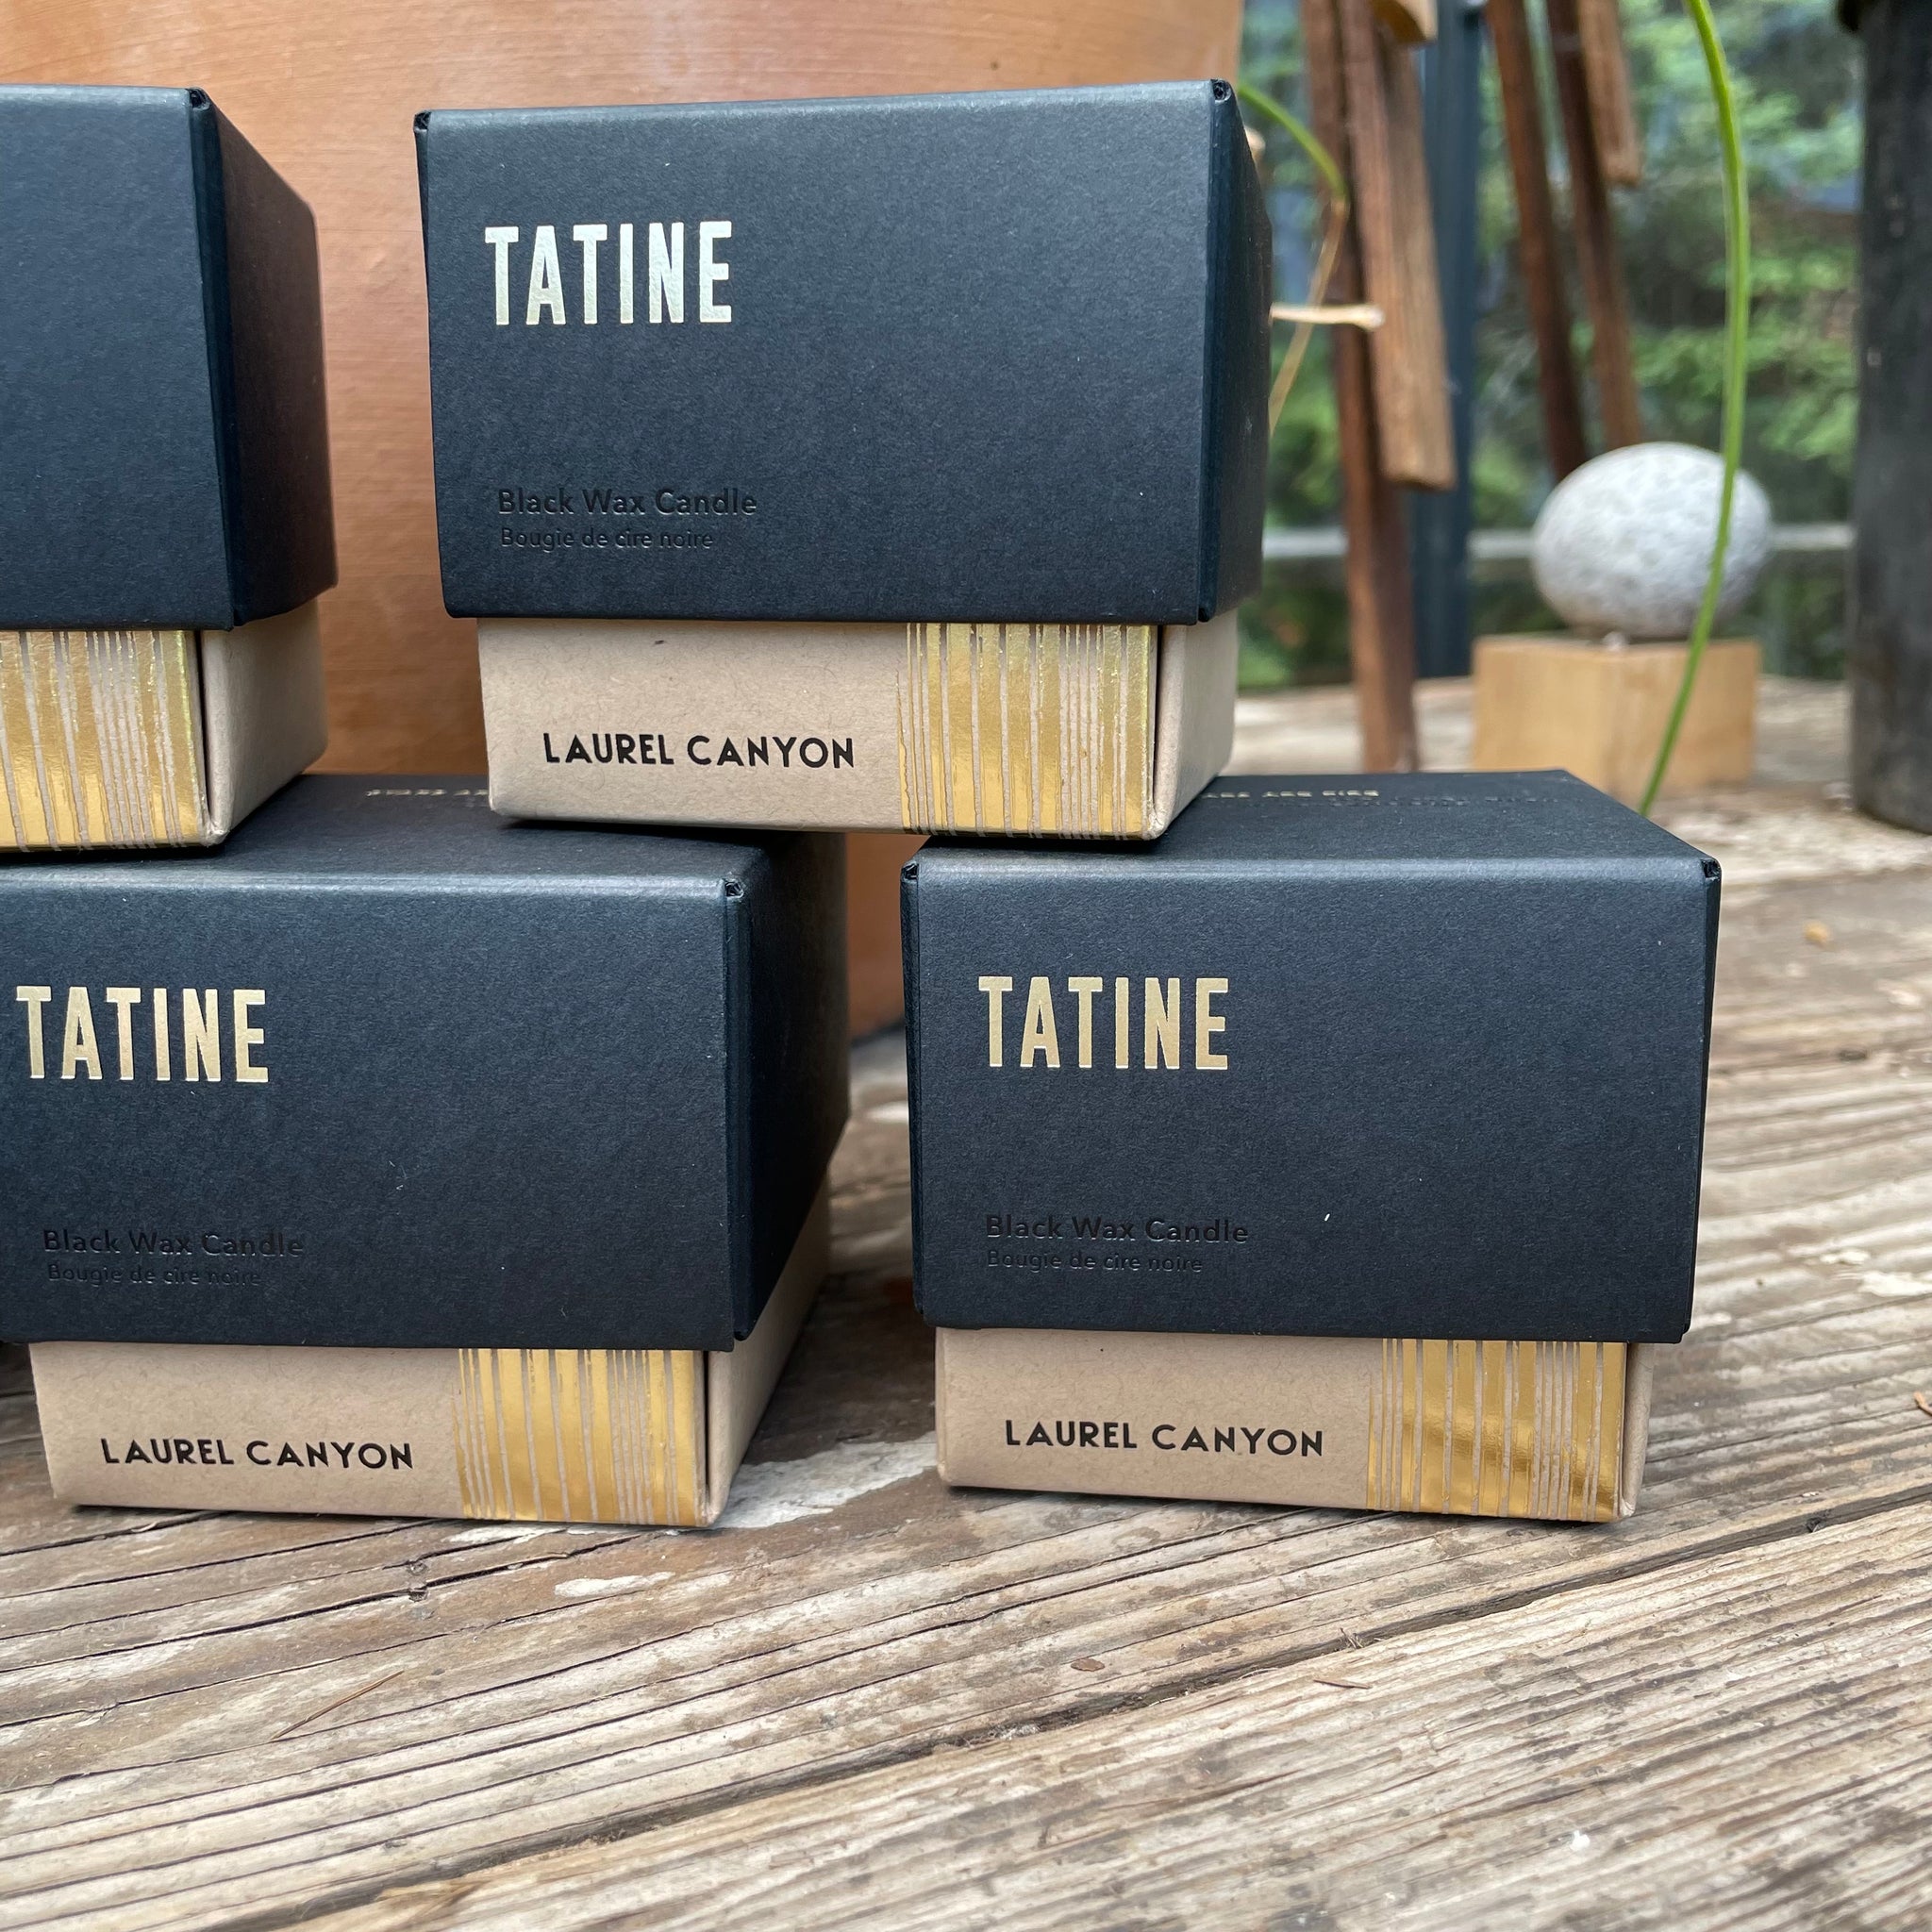 Laurel Canyon Hand-Crafted Candle by Tatine